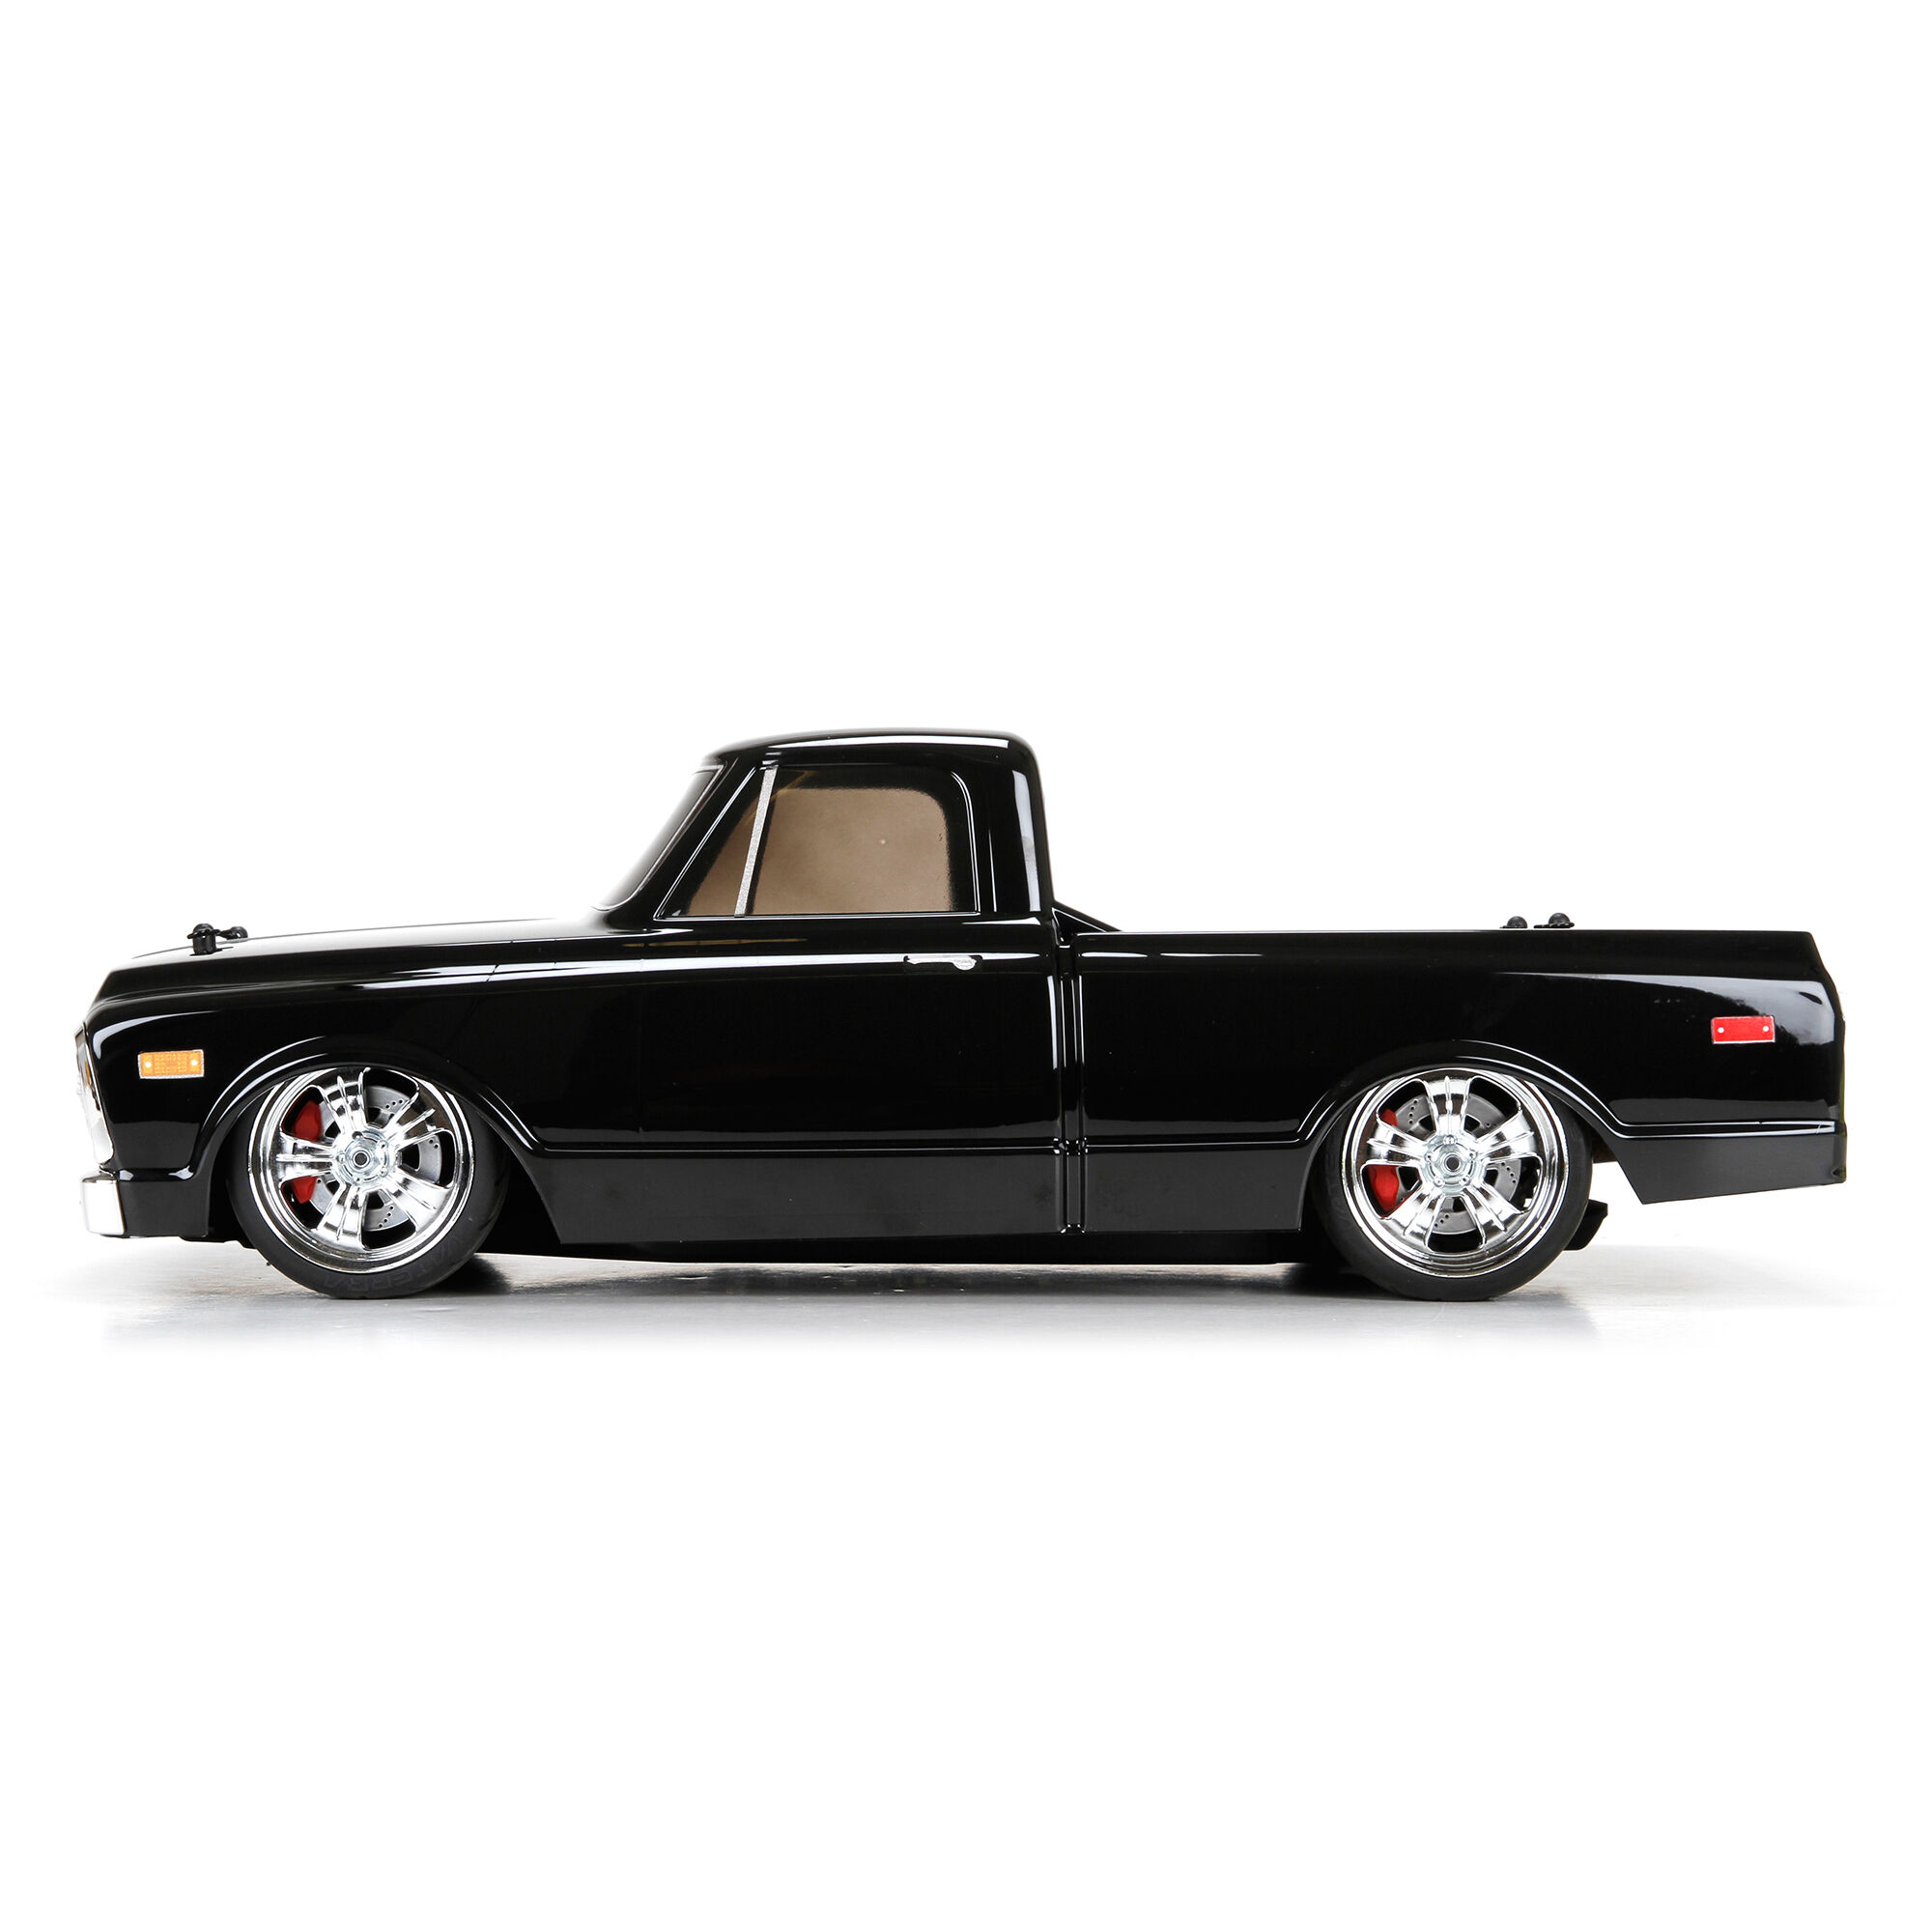 Vaterra 1/10 1972 Chevy C10 Pickup Truck V-100 S 4WD Brushed RTR 